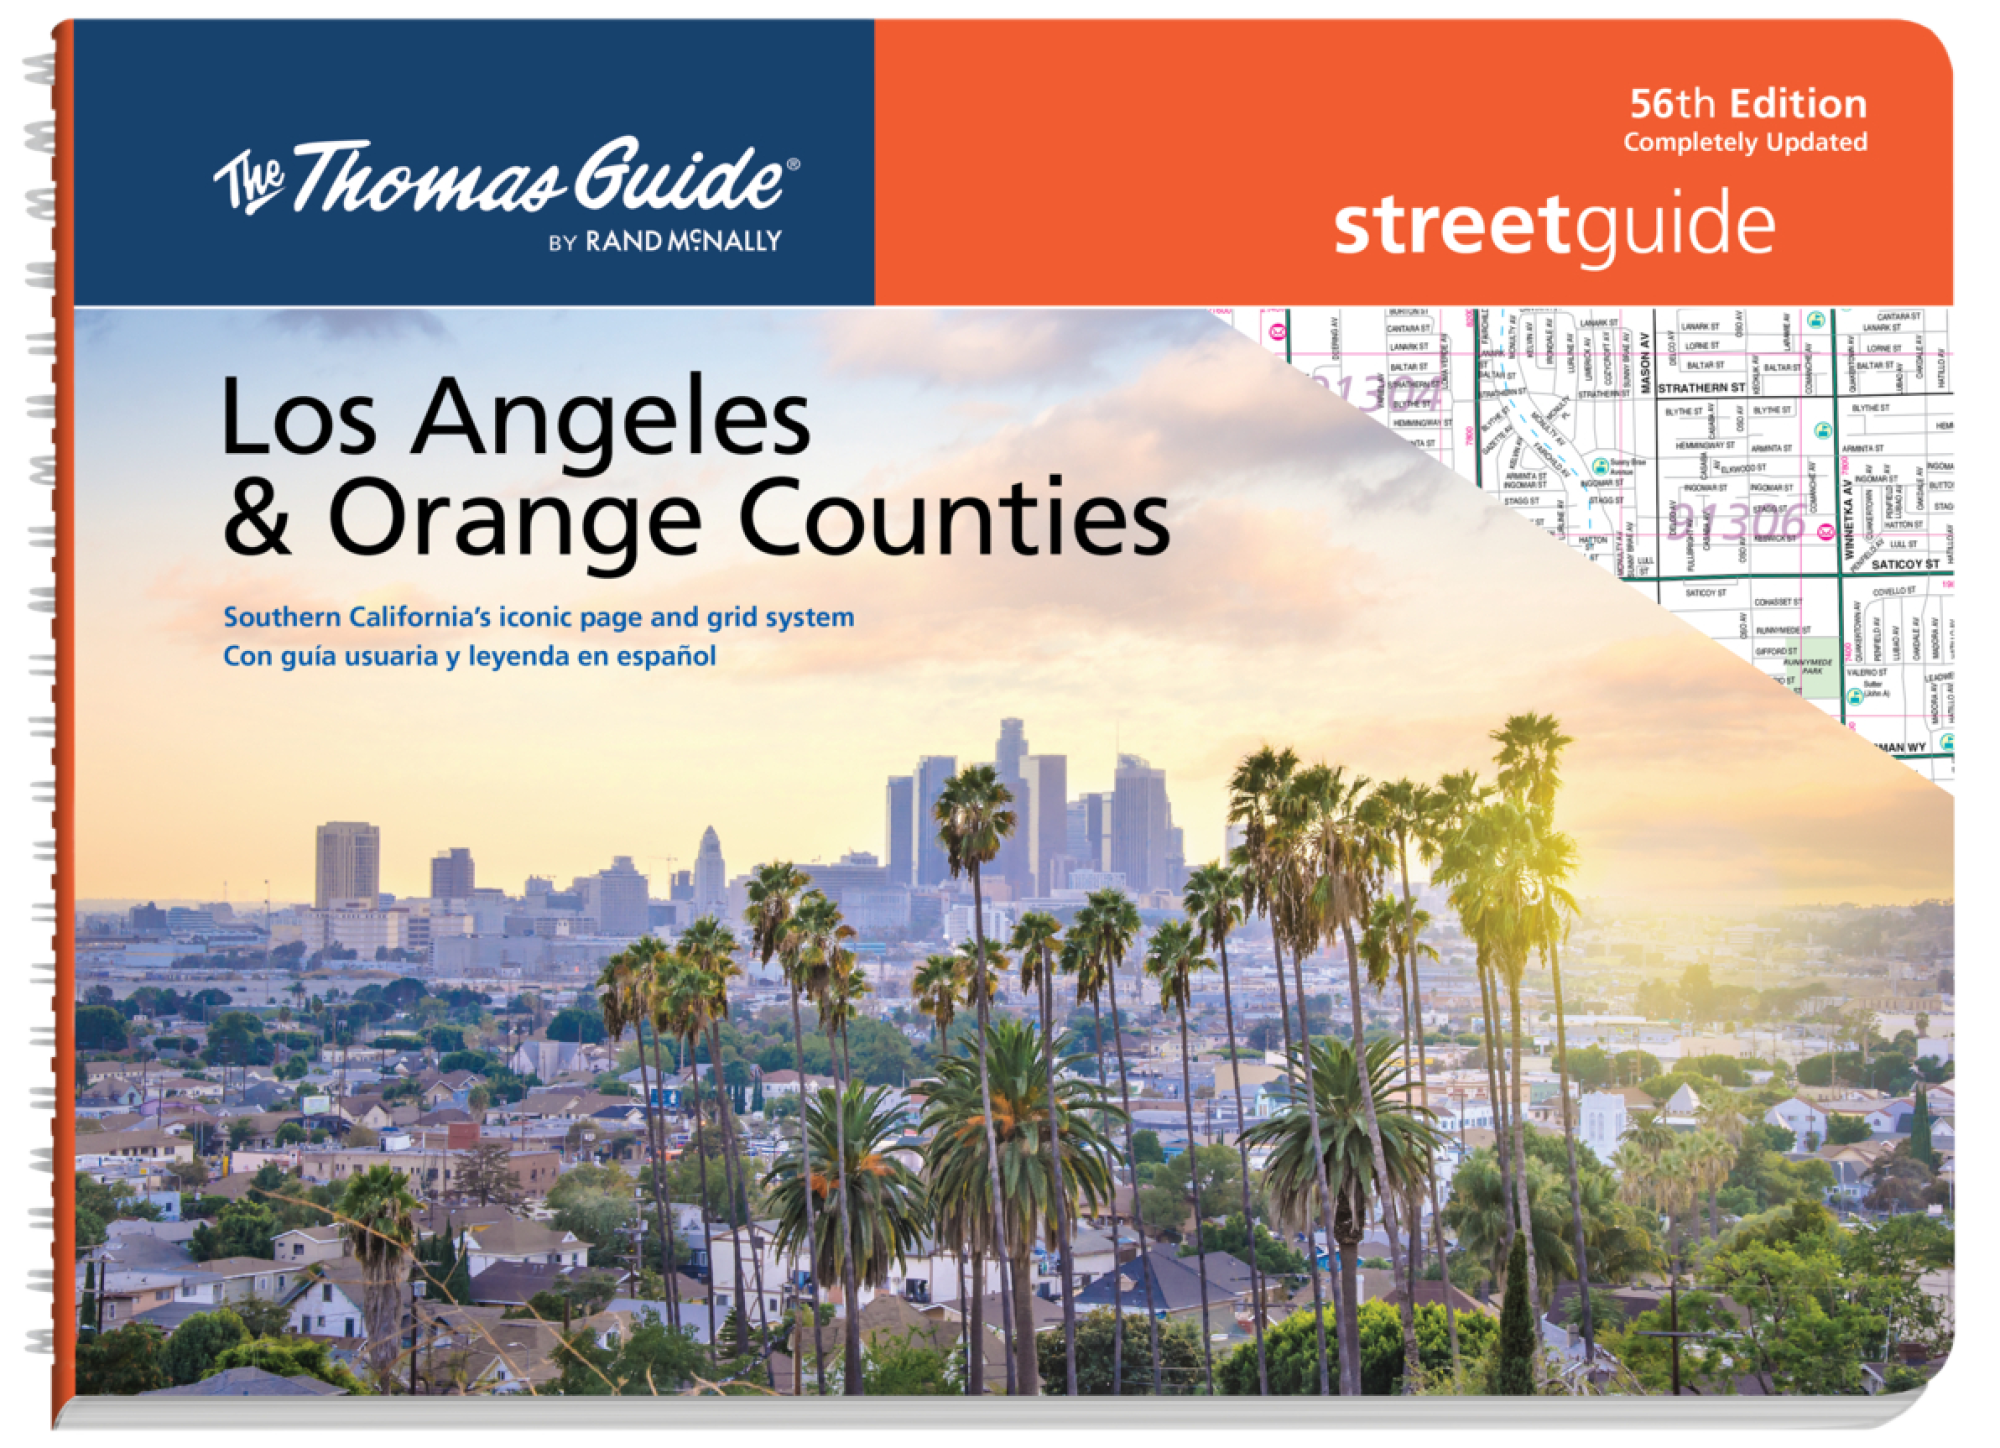 The cover of the new Thomas Guide for Los Angeles and Orange counties shows sunlit palm trees with downtown L.A. and beyond